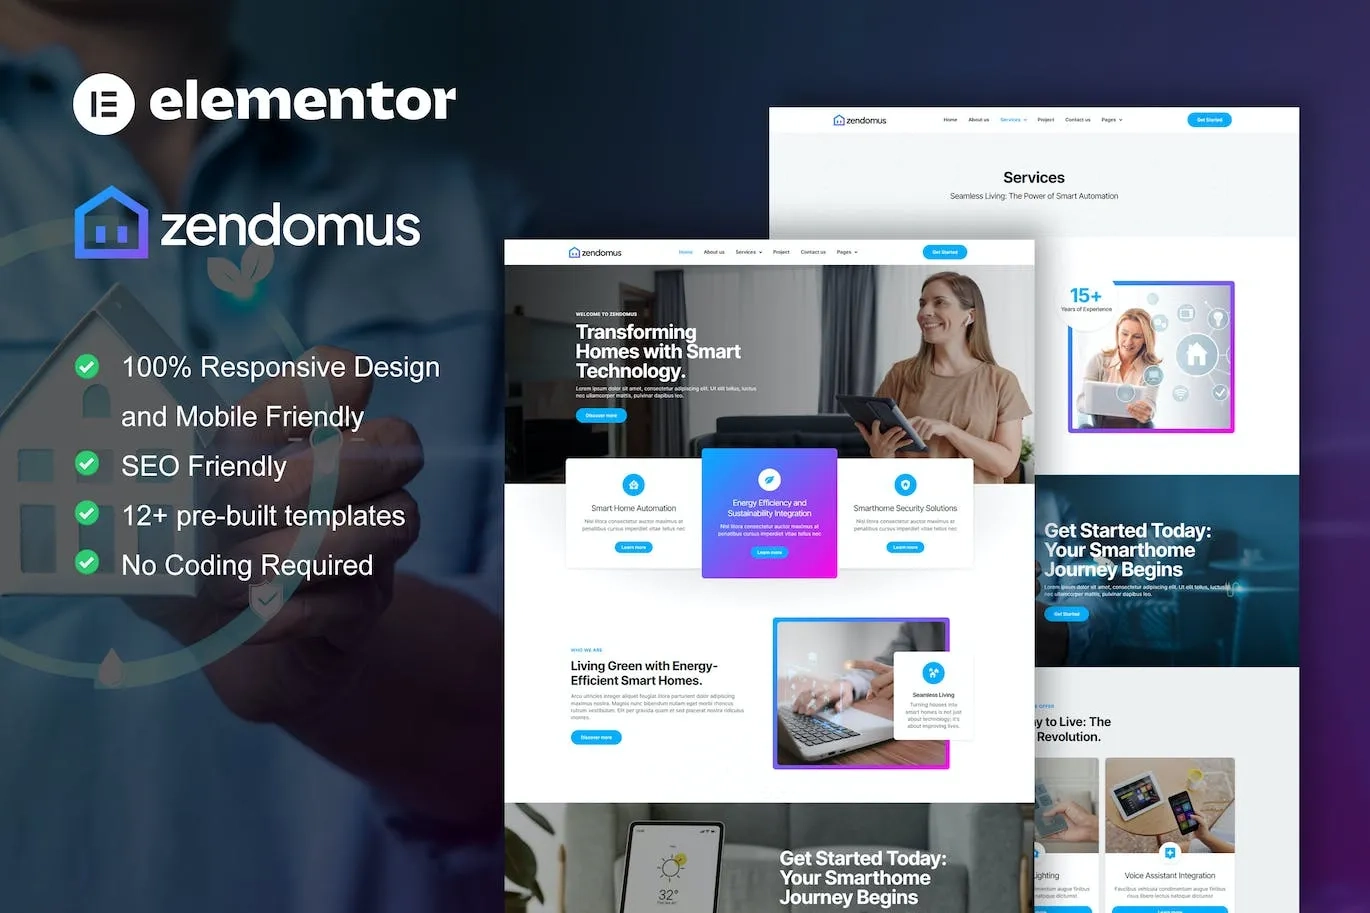 Zendomus Smart Home And Technology Services Elementor Pro Template Kit 16 1695903616 2